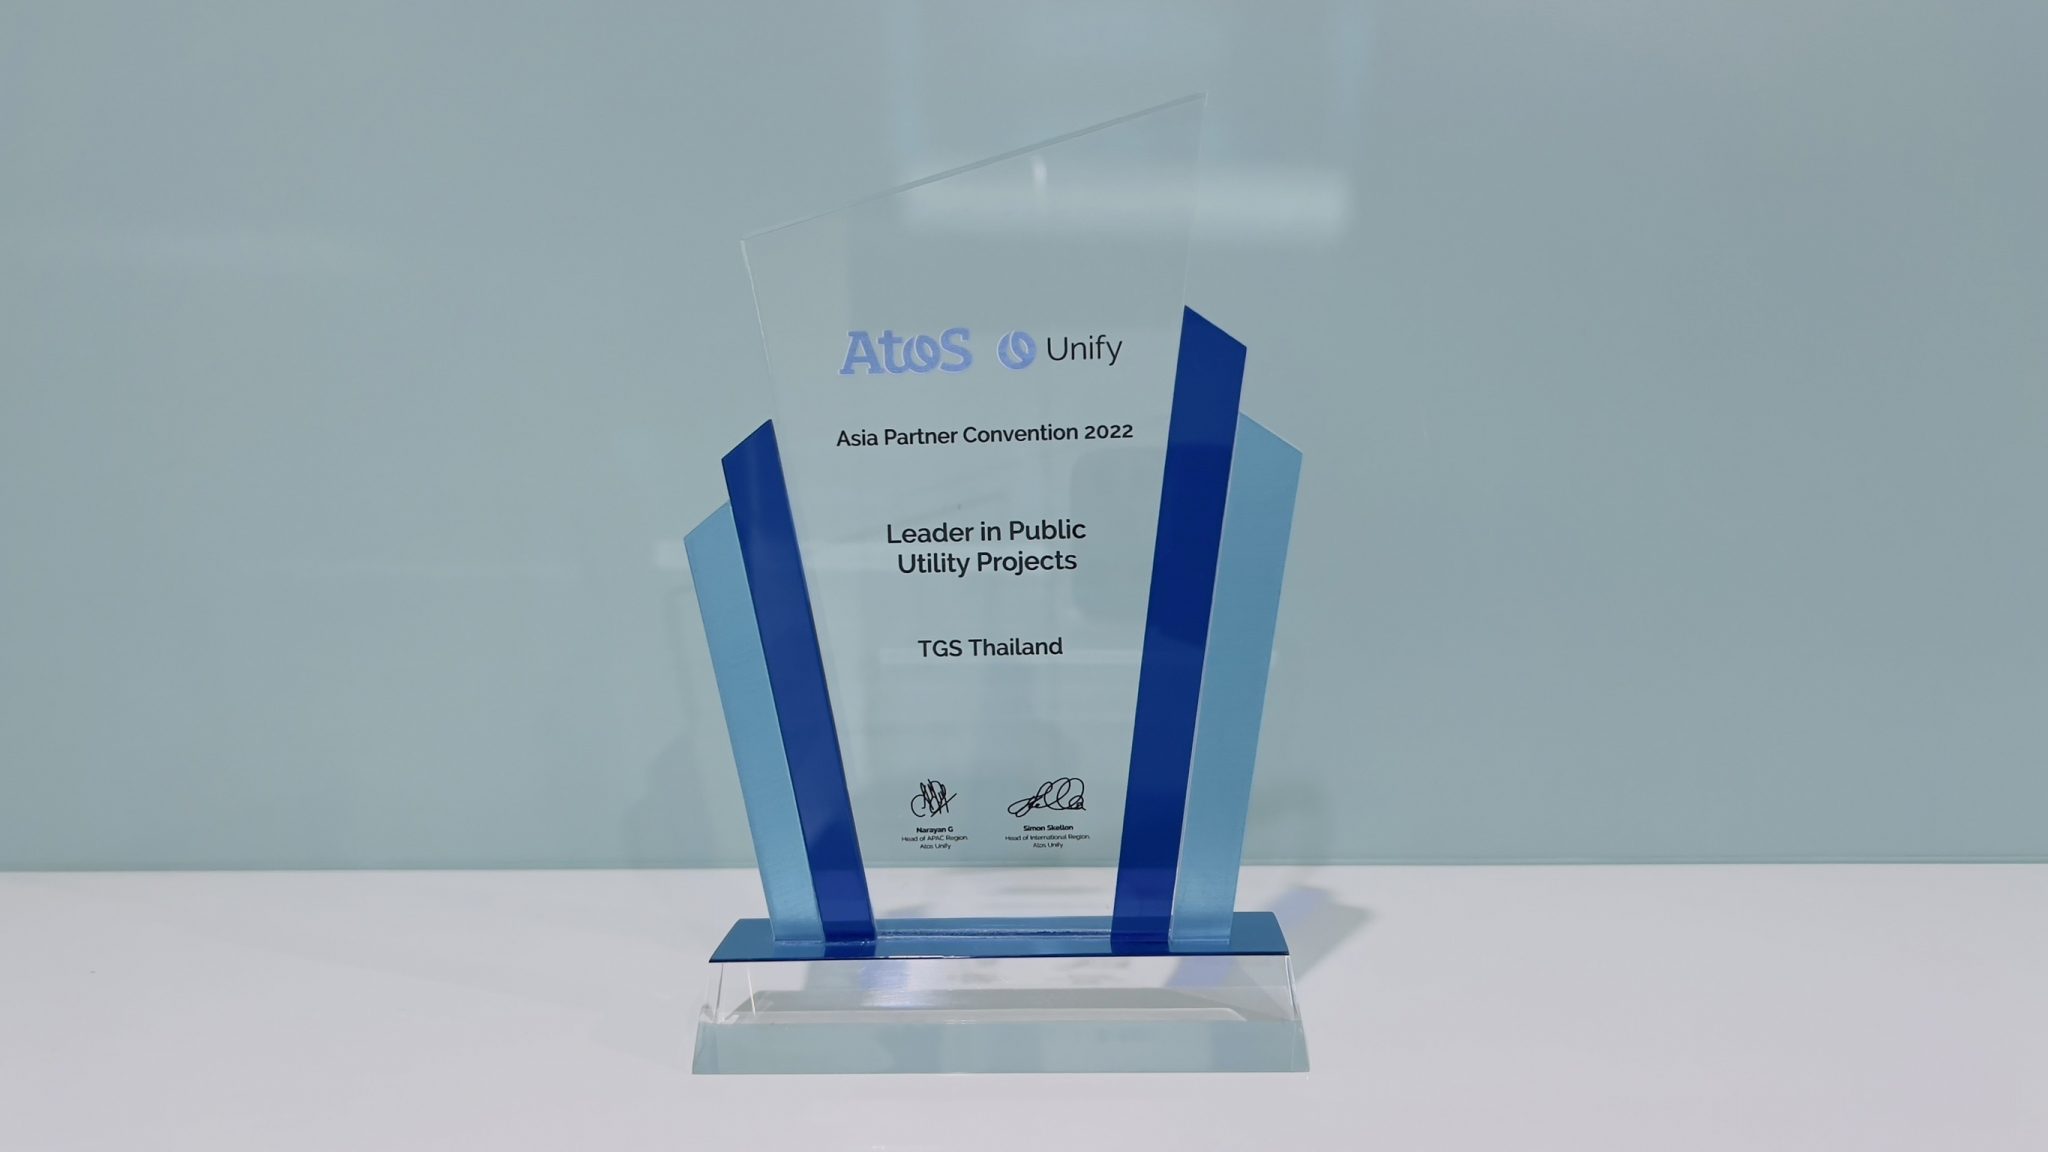 TGS Thailand Awarded as Leader in Public Utility Projects on Atos Unify Asia Partner Convention 2022